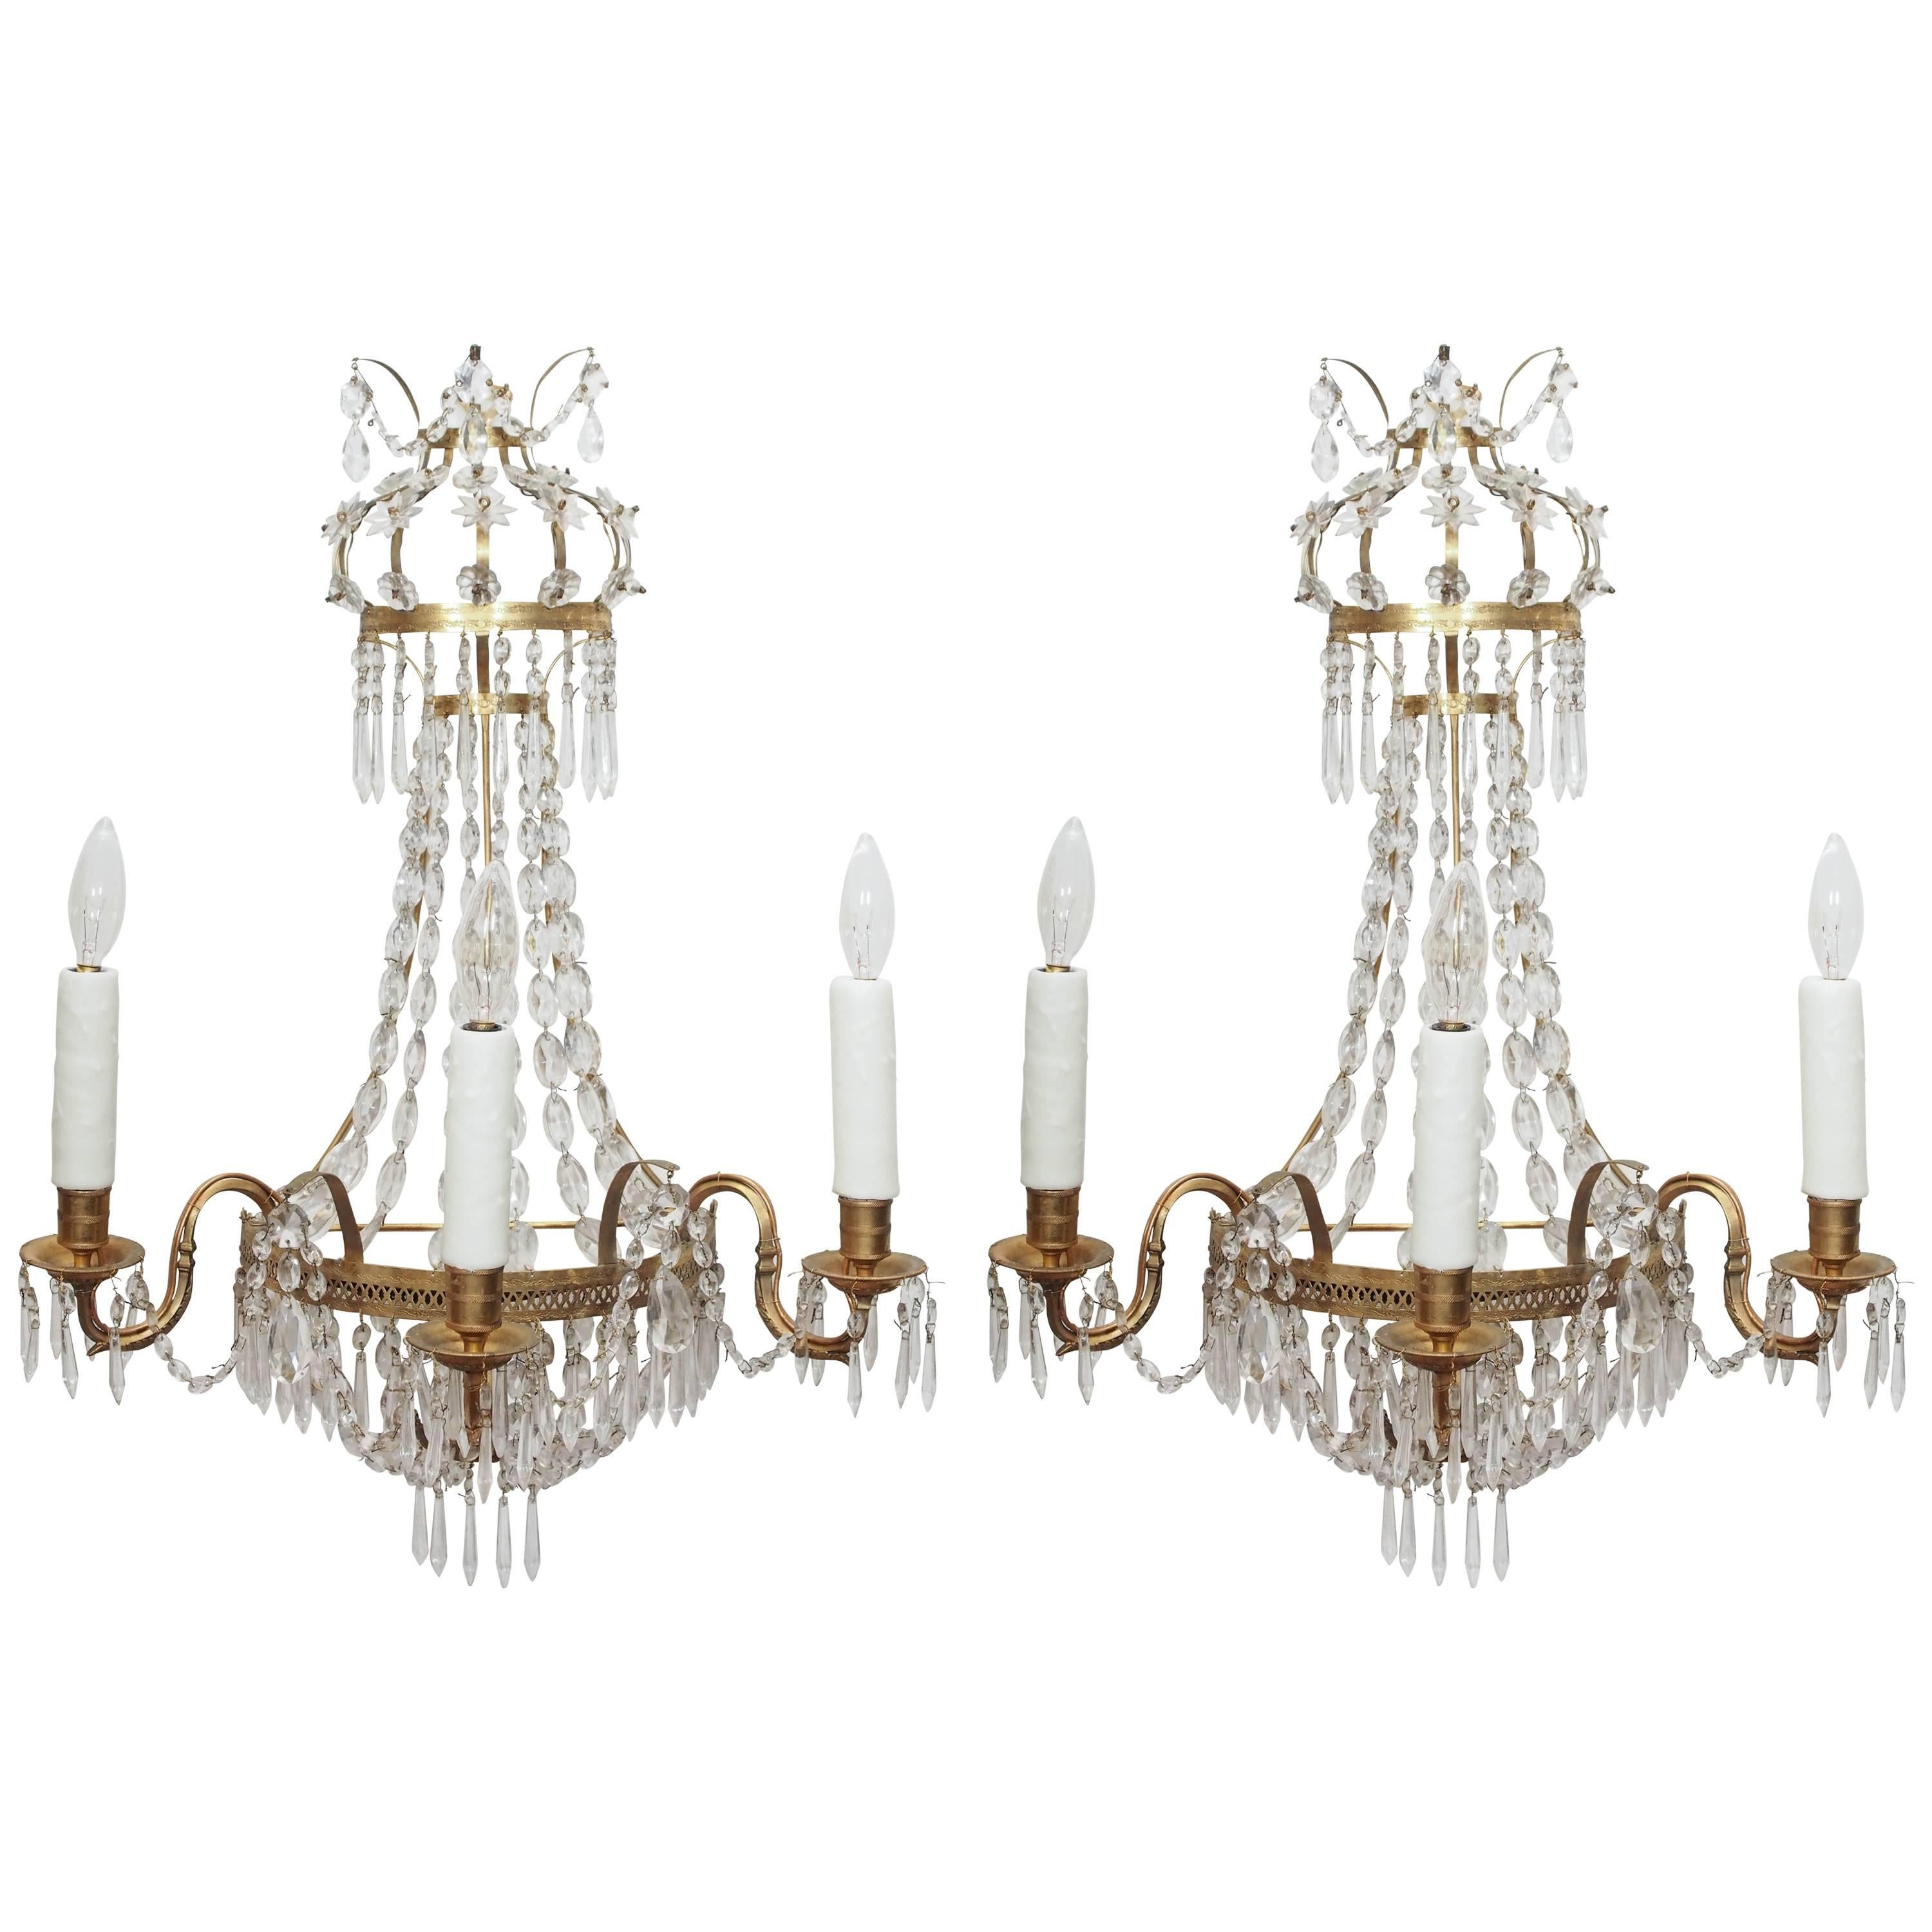 Pair of Italian Empire Style Brass and Crystal Wall Sconces